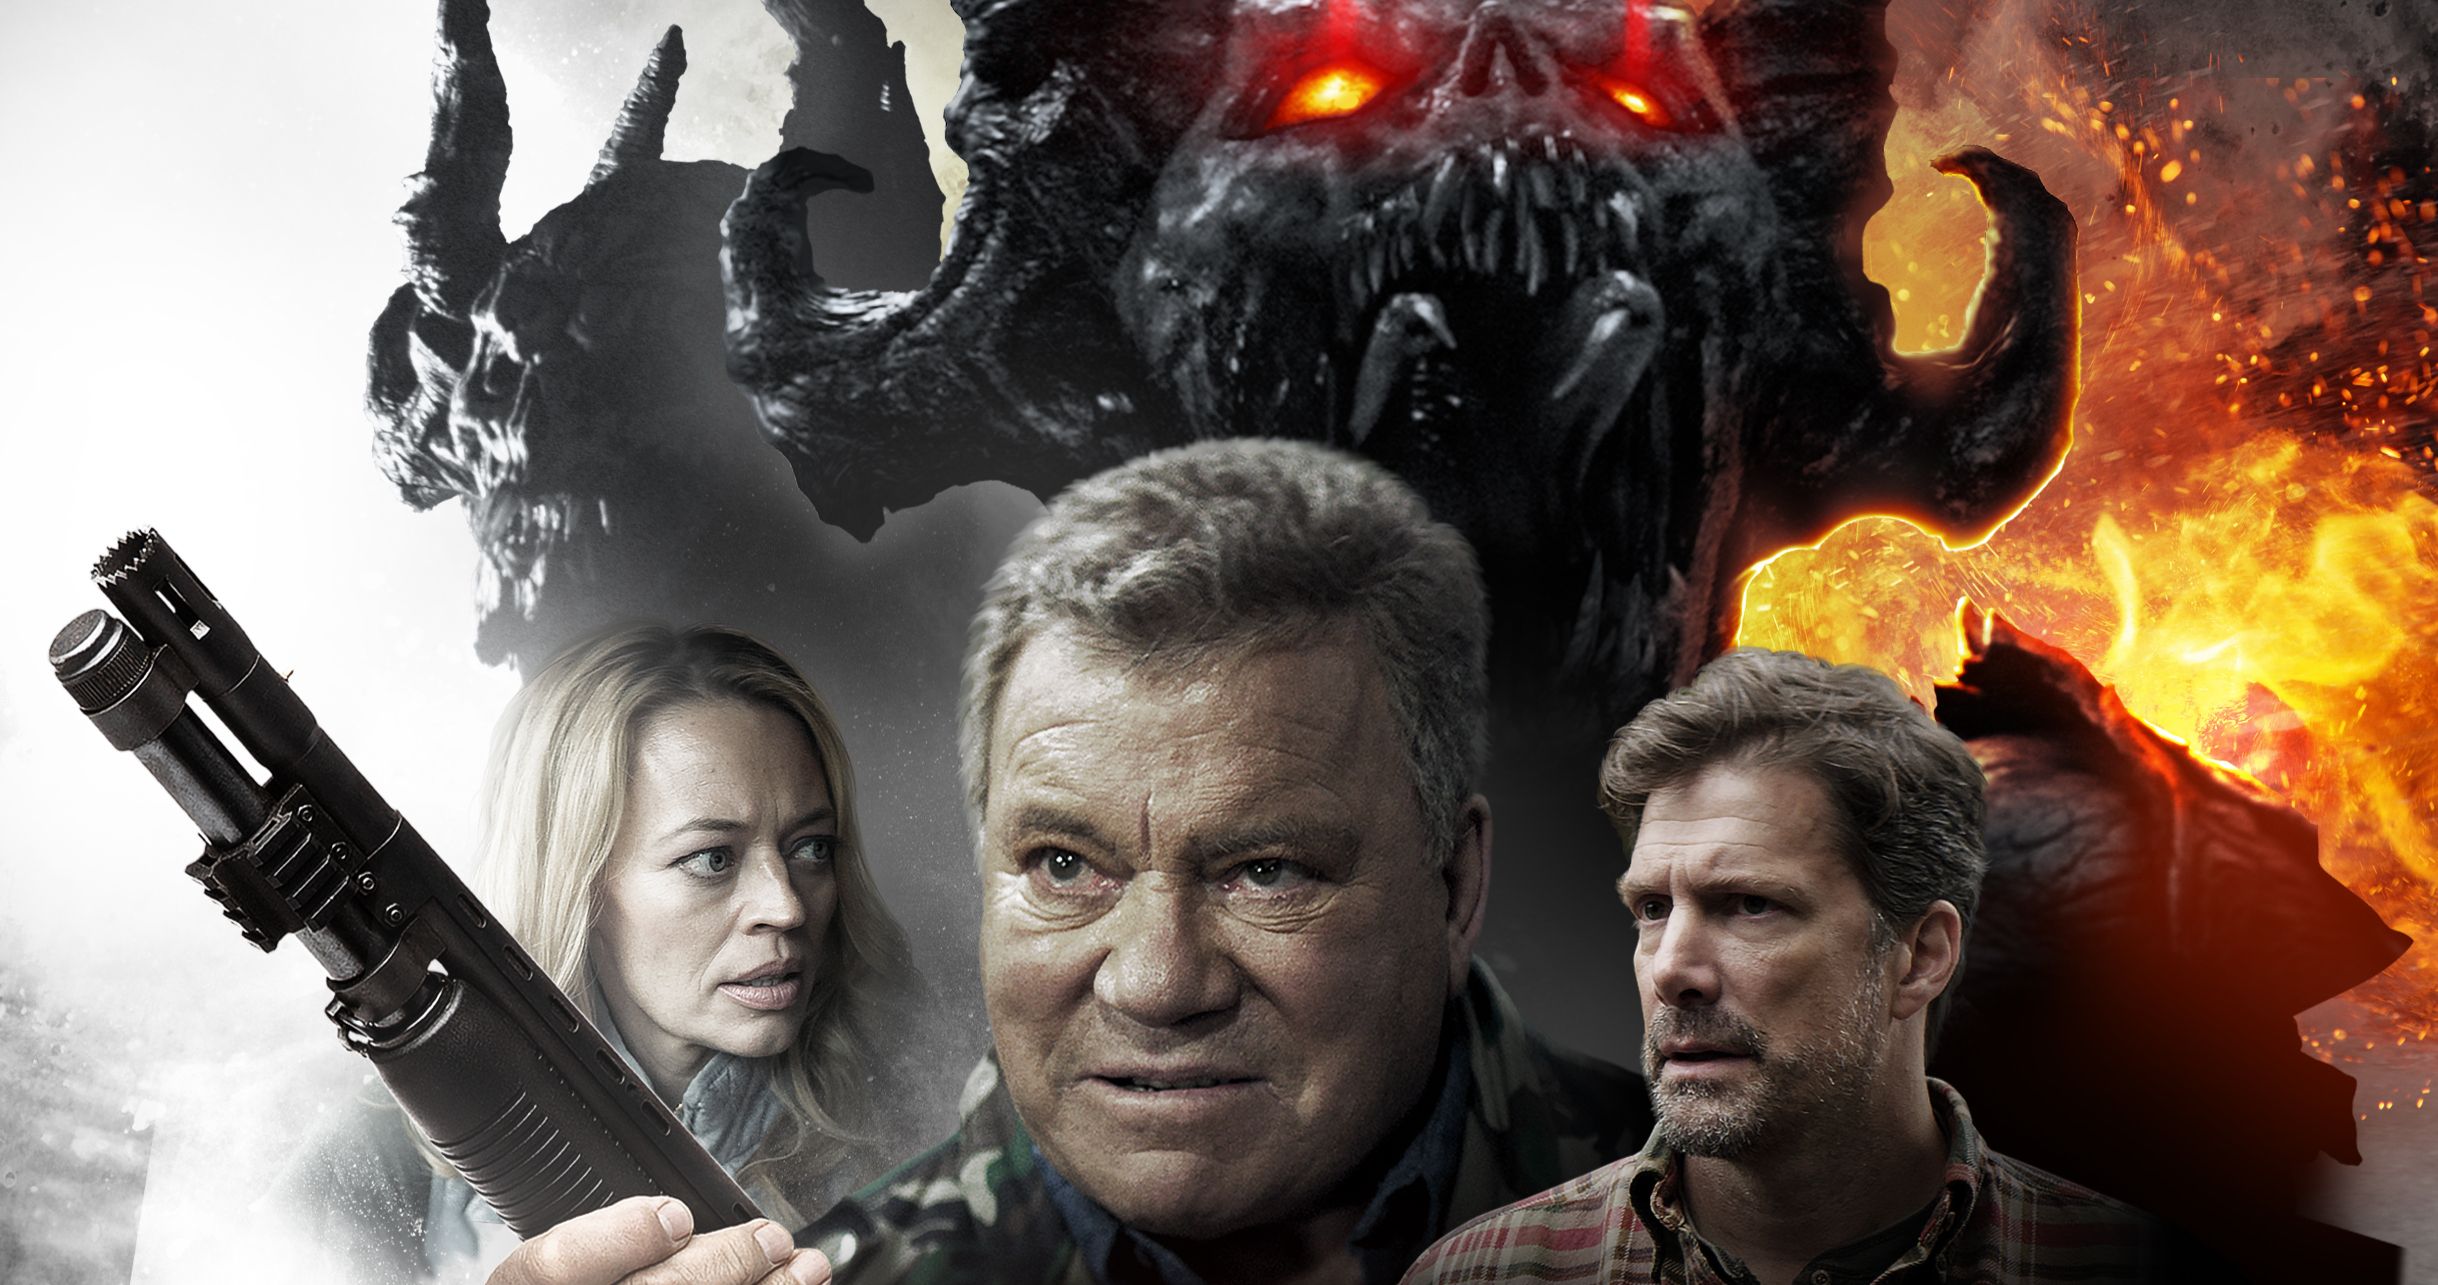 Devil's Revenge Director Talks About Dragging William Shatner to Hell [Exclusive]